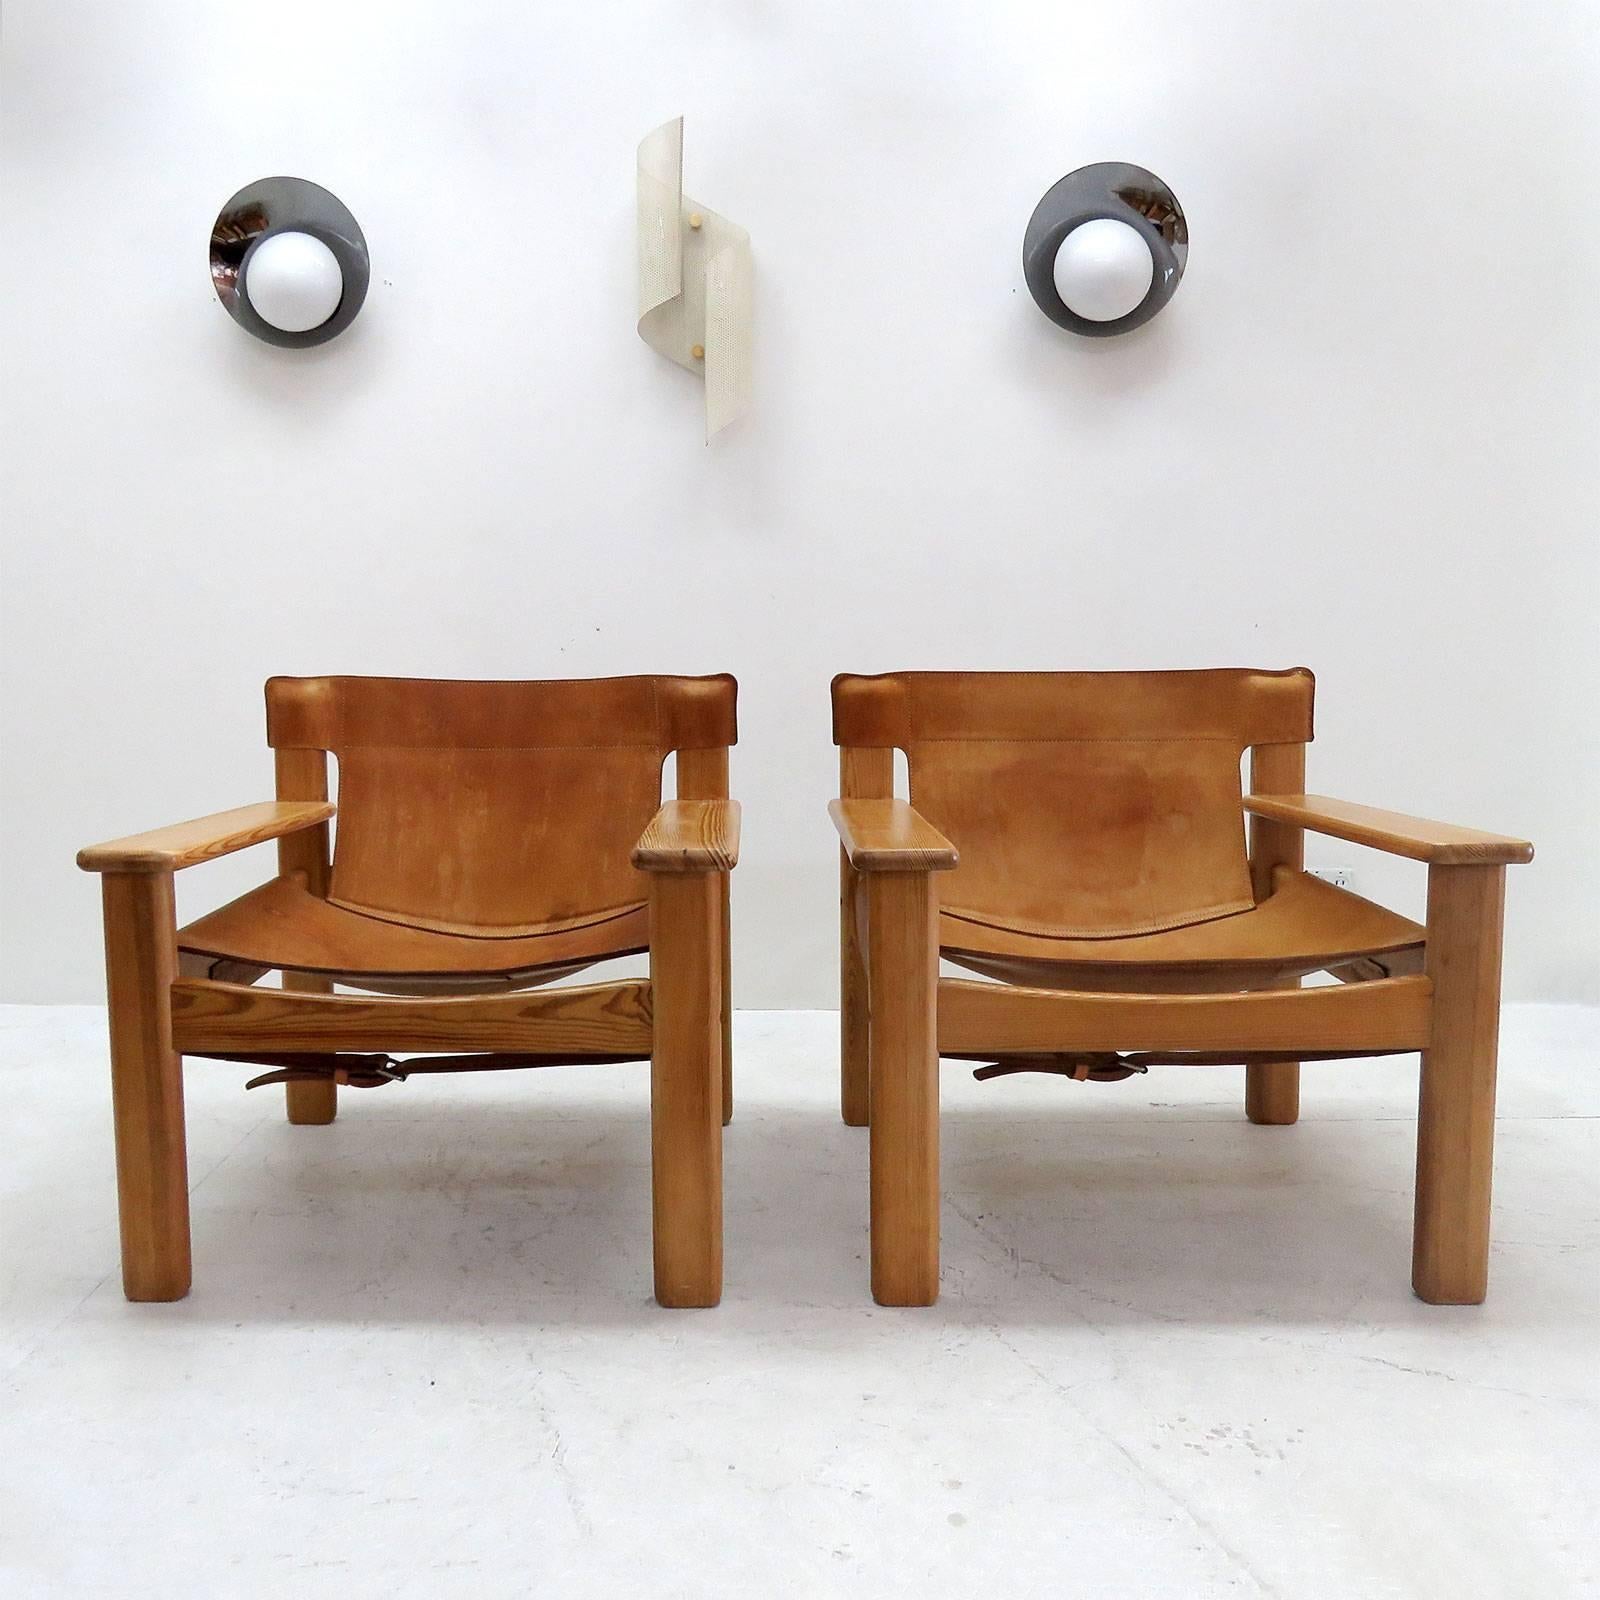 Bold and comfortable Danish modern lounge chair by Karin Mobring, Sweden, designed in 1977, oversized pine frame with thick cognac colored leather with incredible patina.